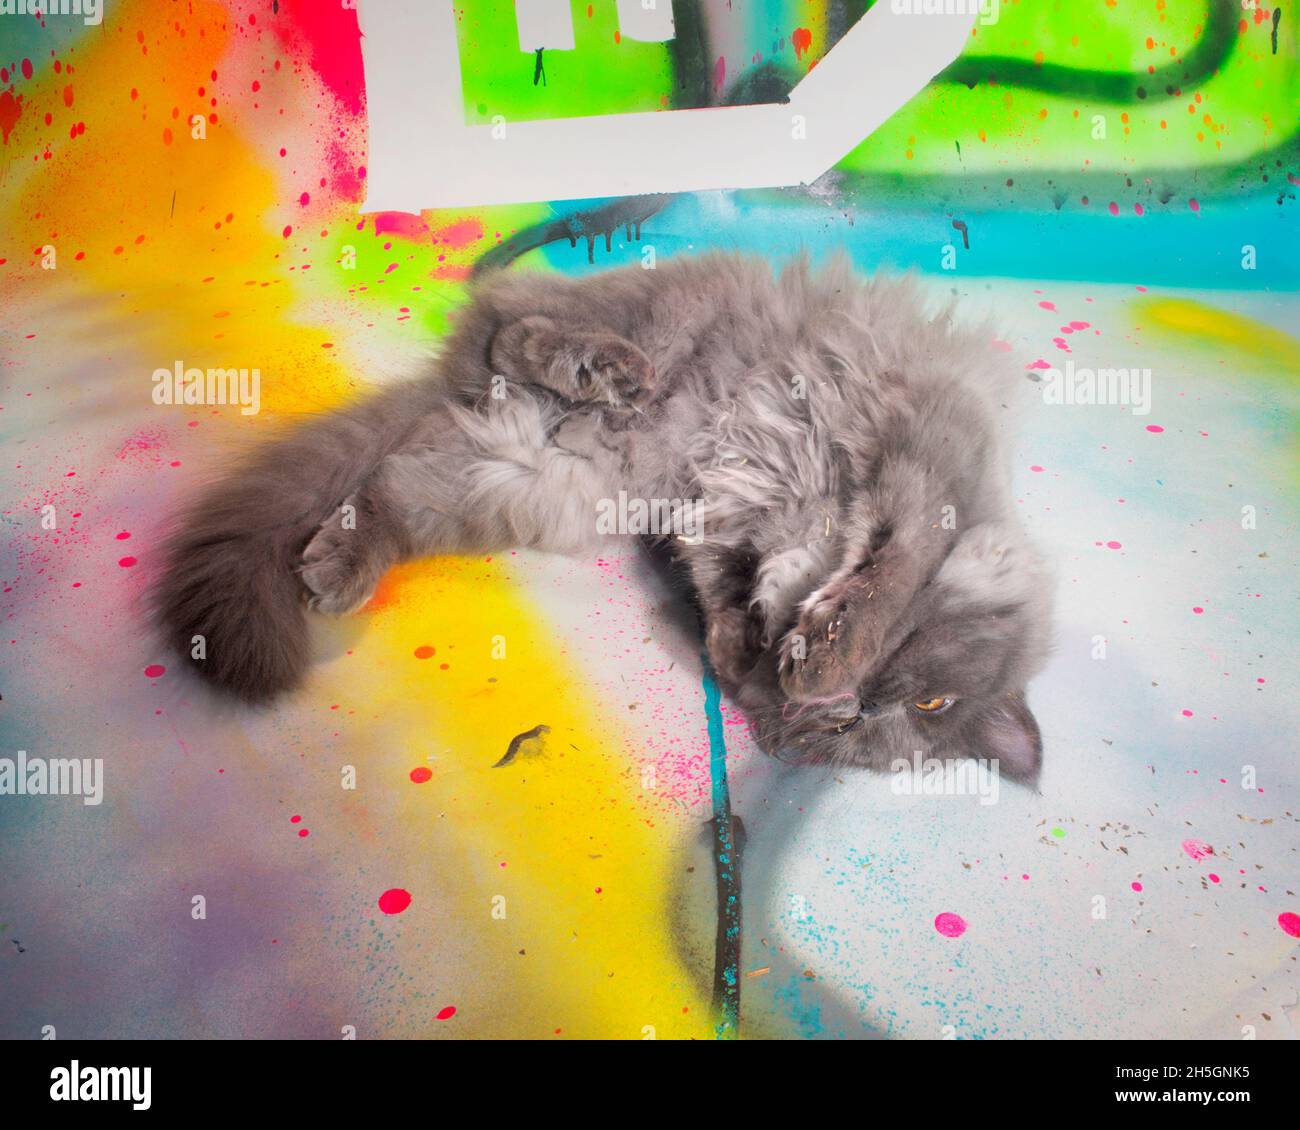 Cute funny fluffy grey kitten rolling on his back, on a colorful painted surface. Stock Photo